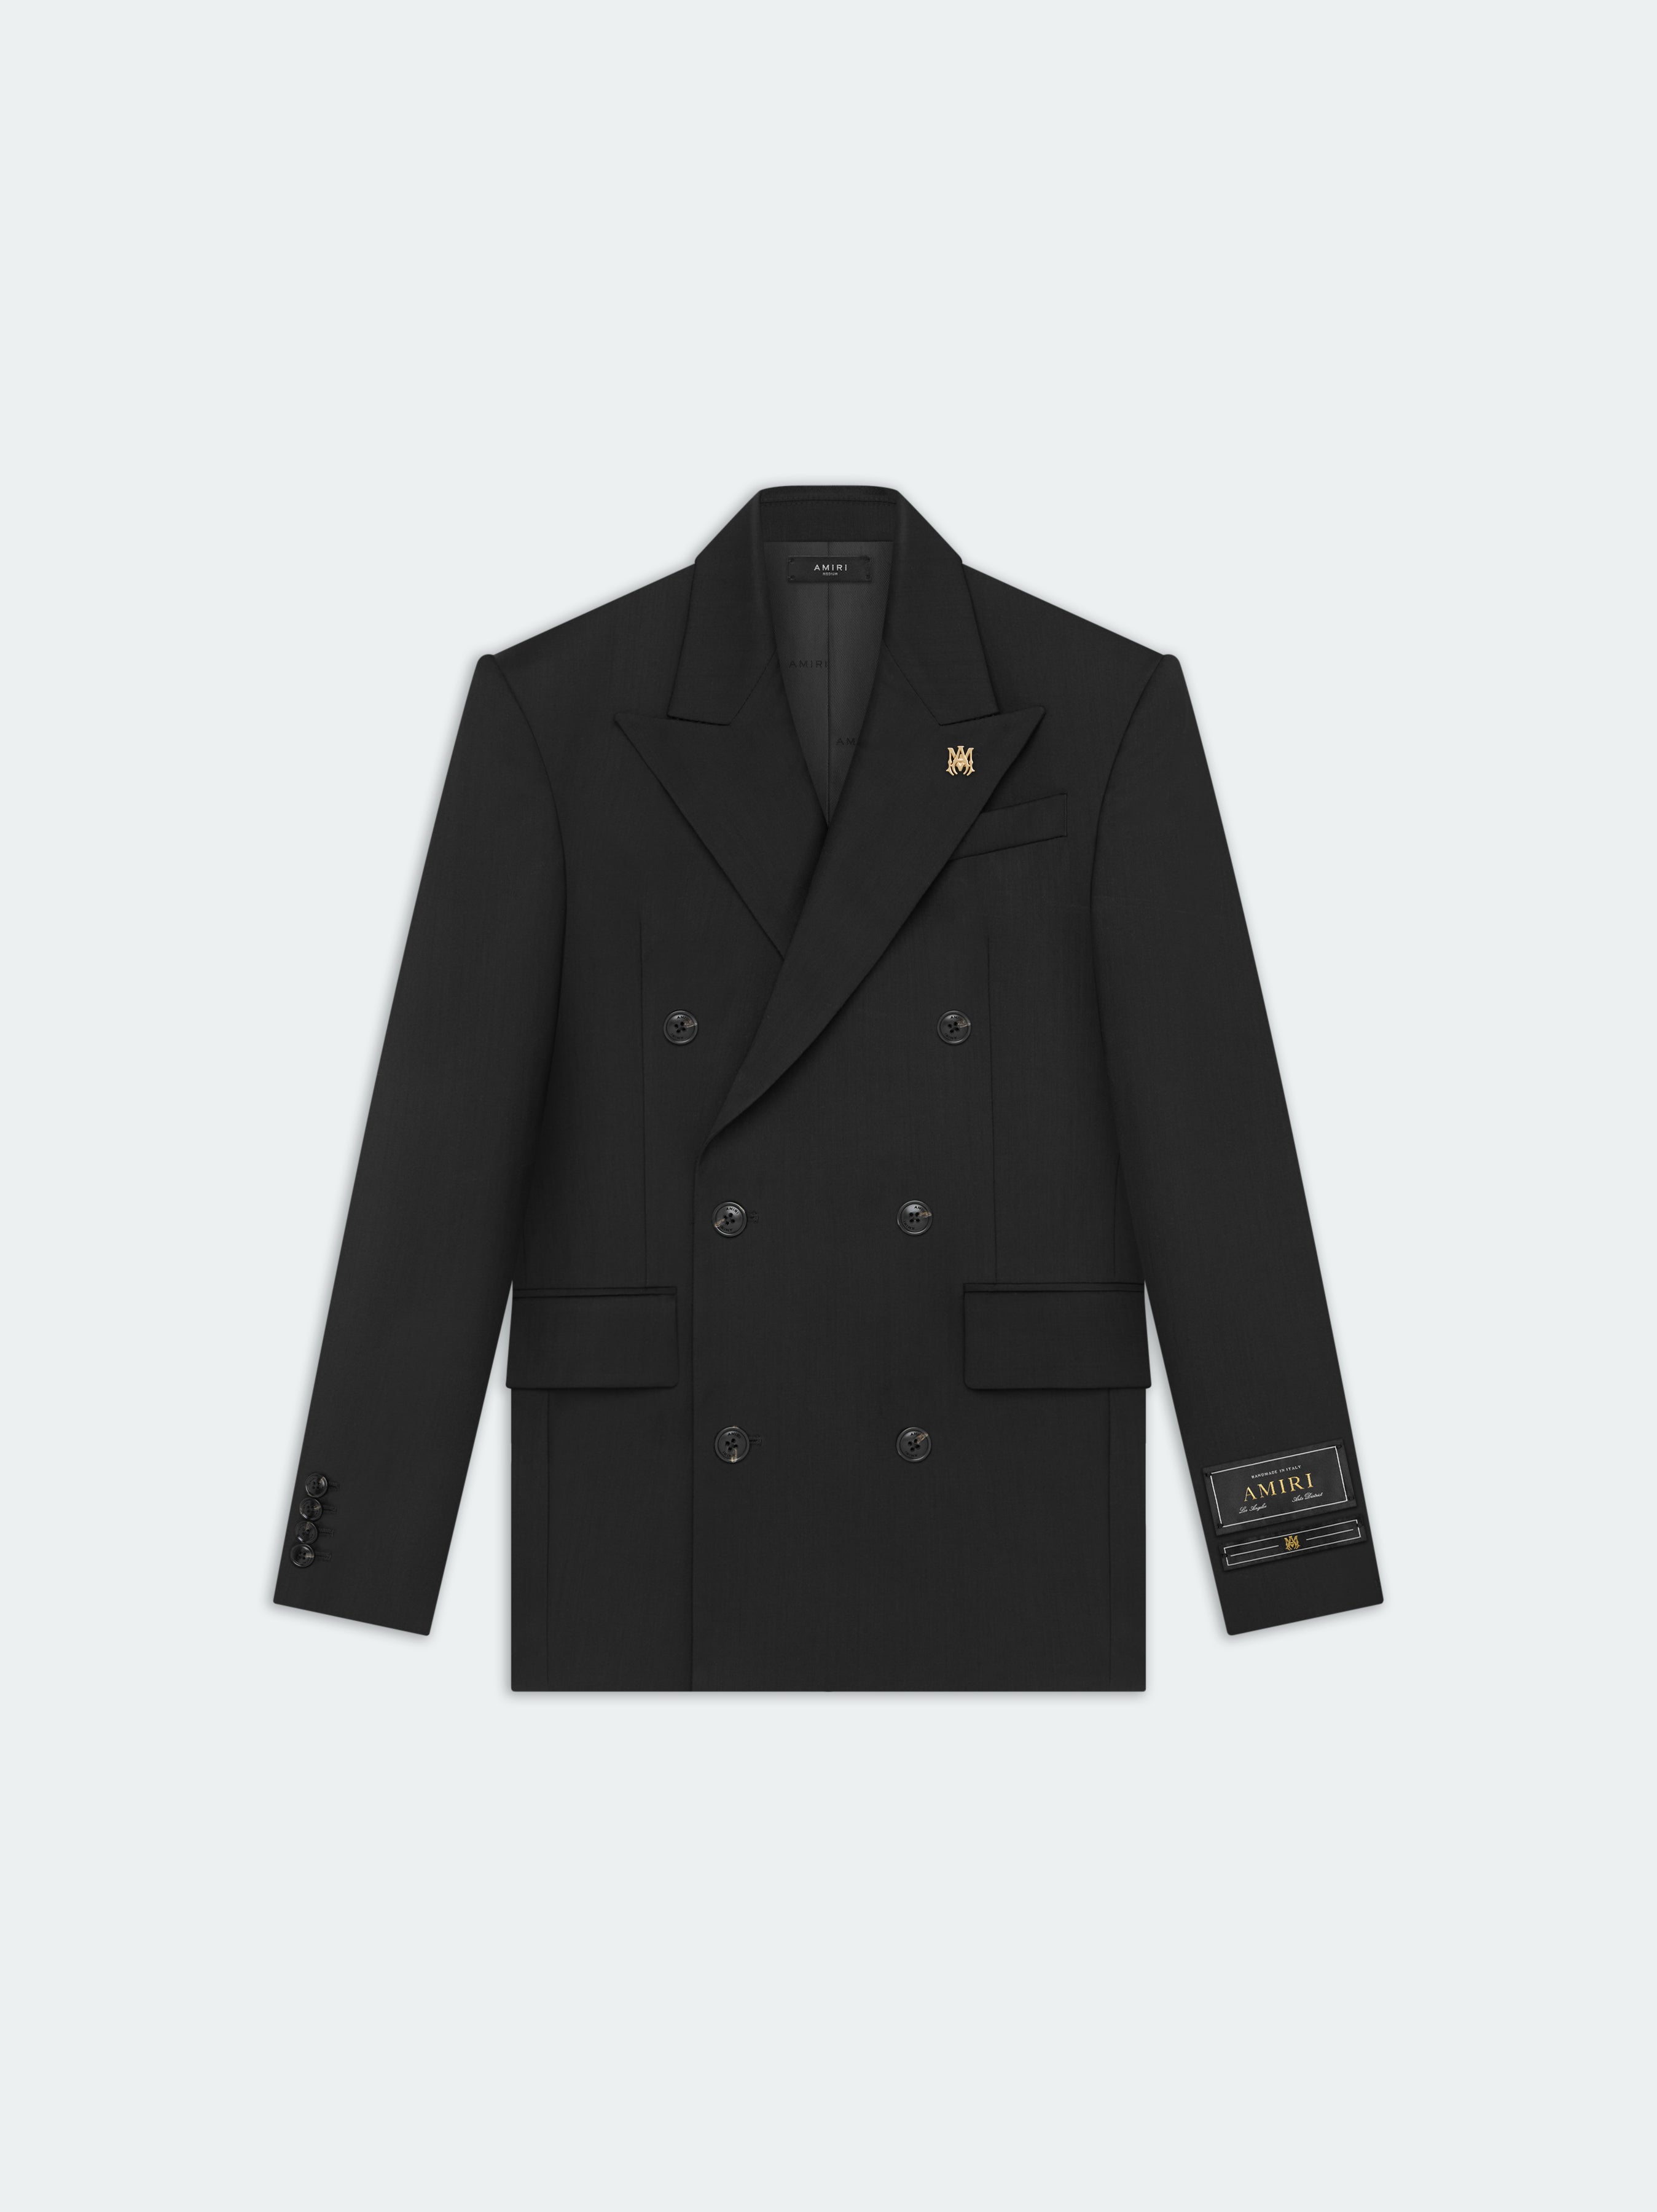 Product DOUBLE BREAST BLAZER-BLACK featured image